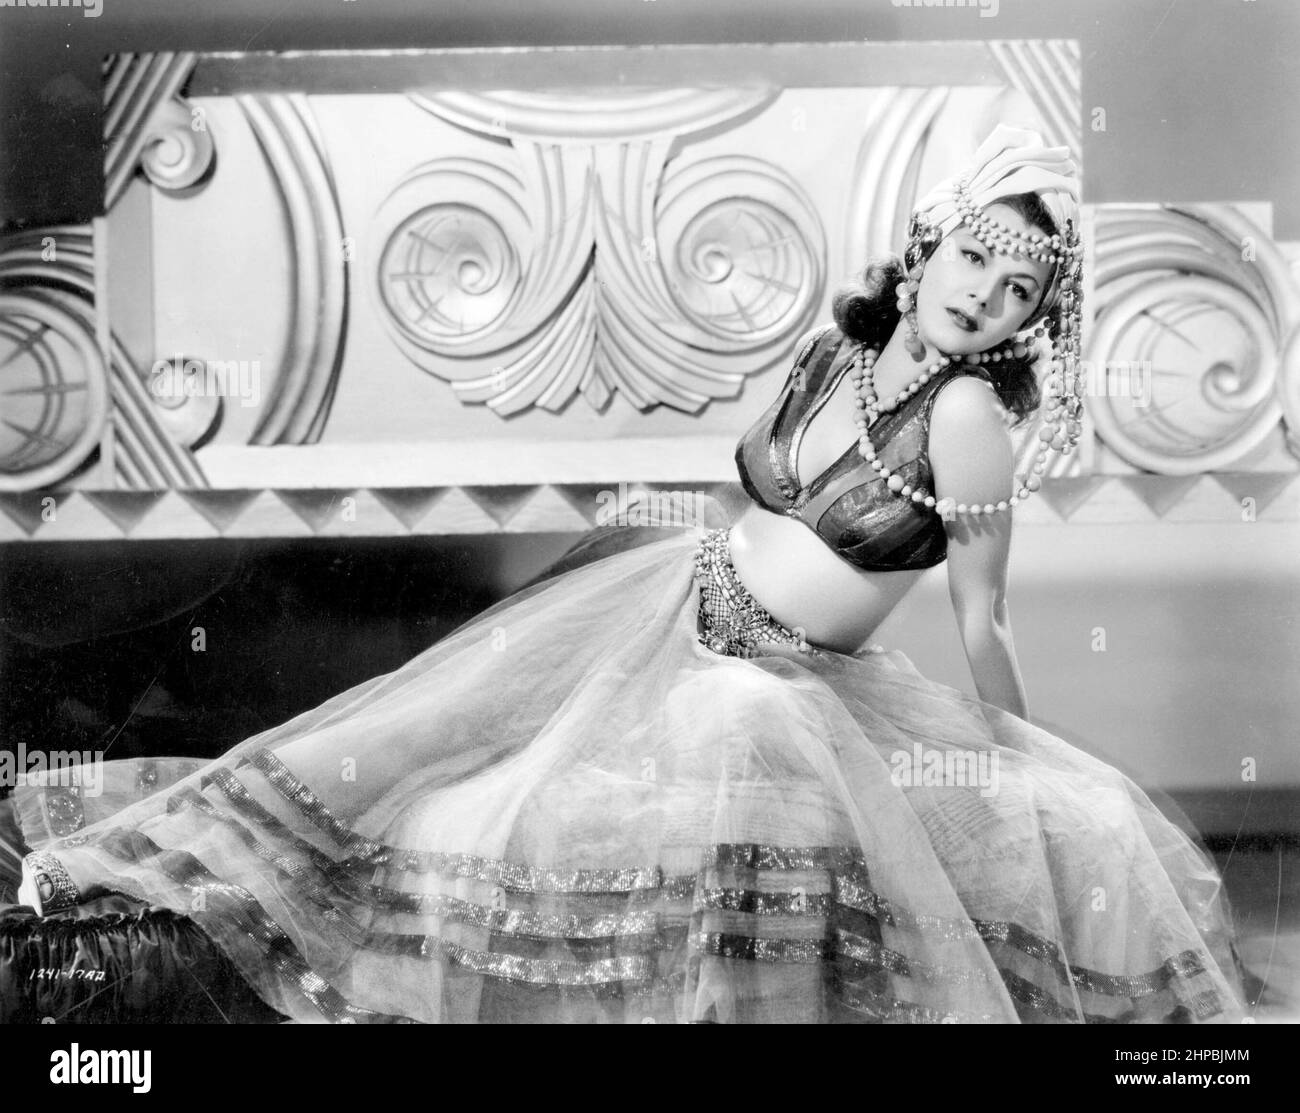 MARIA MONTEZ in ARABIAN NIGHTS (1942), directed by JOHN RAWLINS. Credit: UNIVERSAL PICTURES / Album Stock Photo